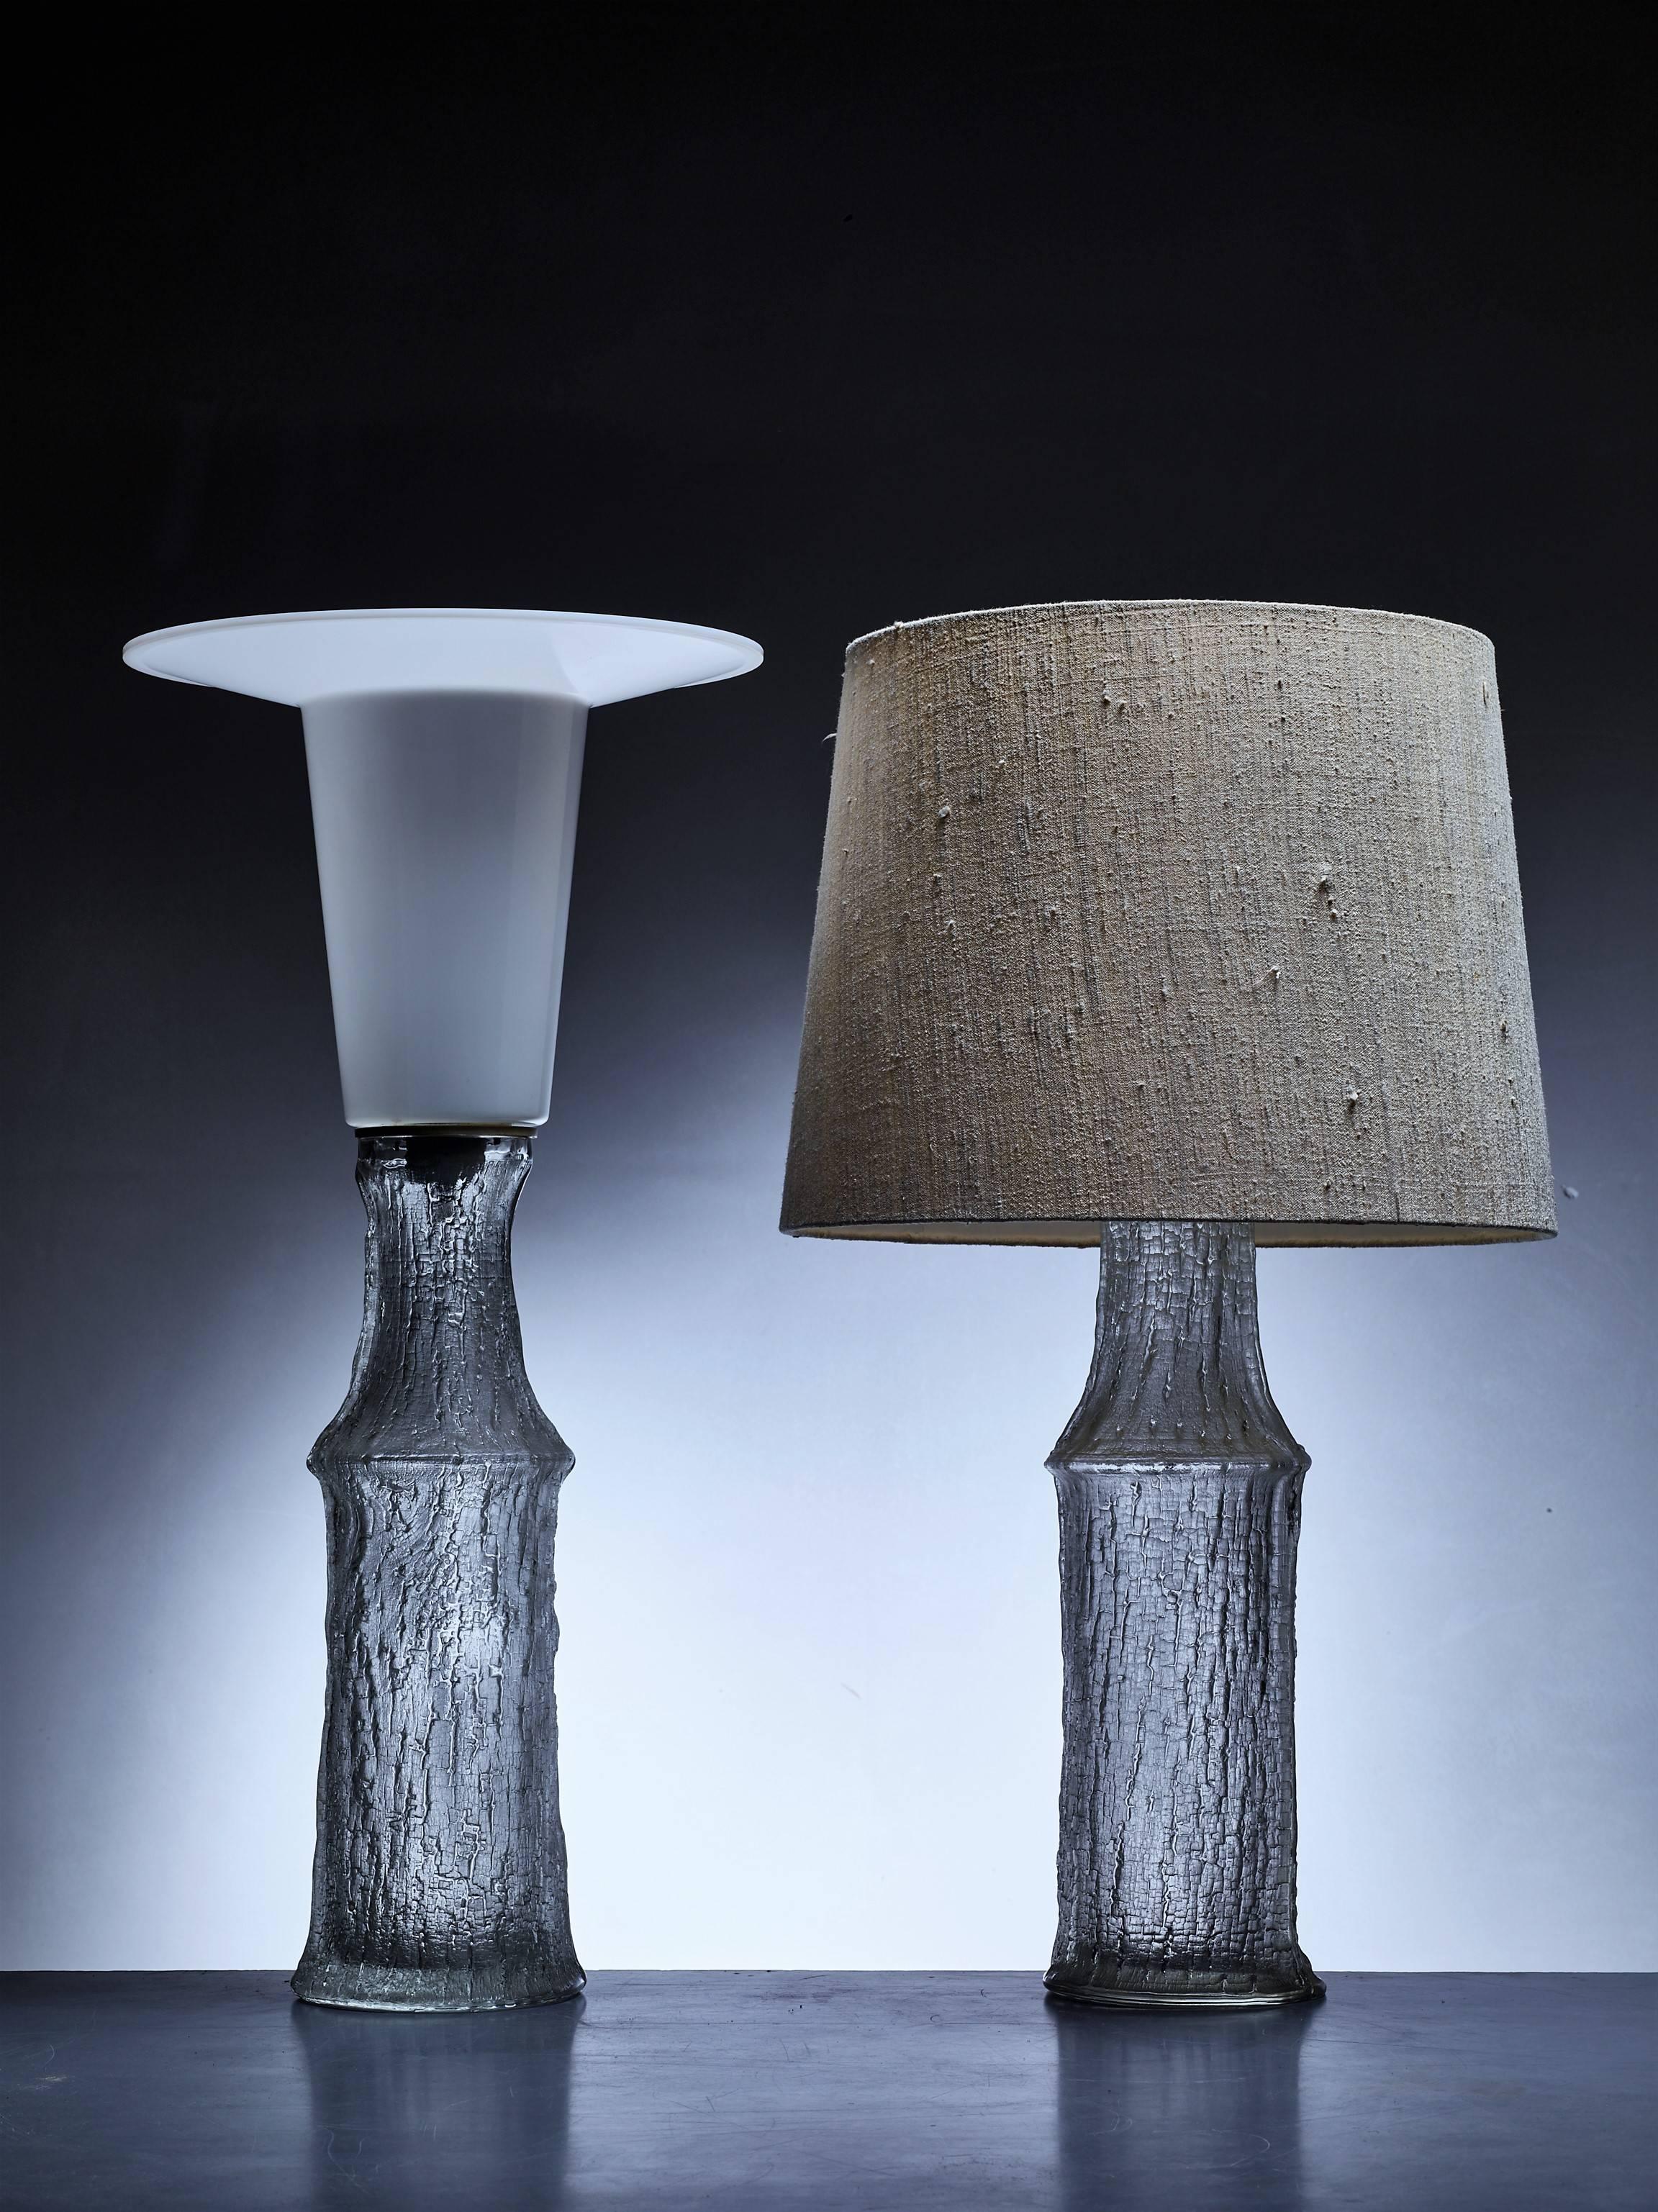 Pair of Timo Sarpaneva Table Lamps for Iittala, Finland, 1960s In Excellent Condition For Sale In Maastricht, NL